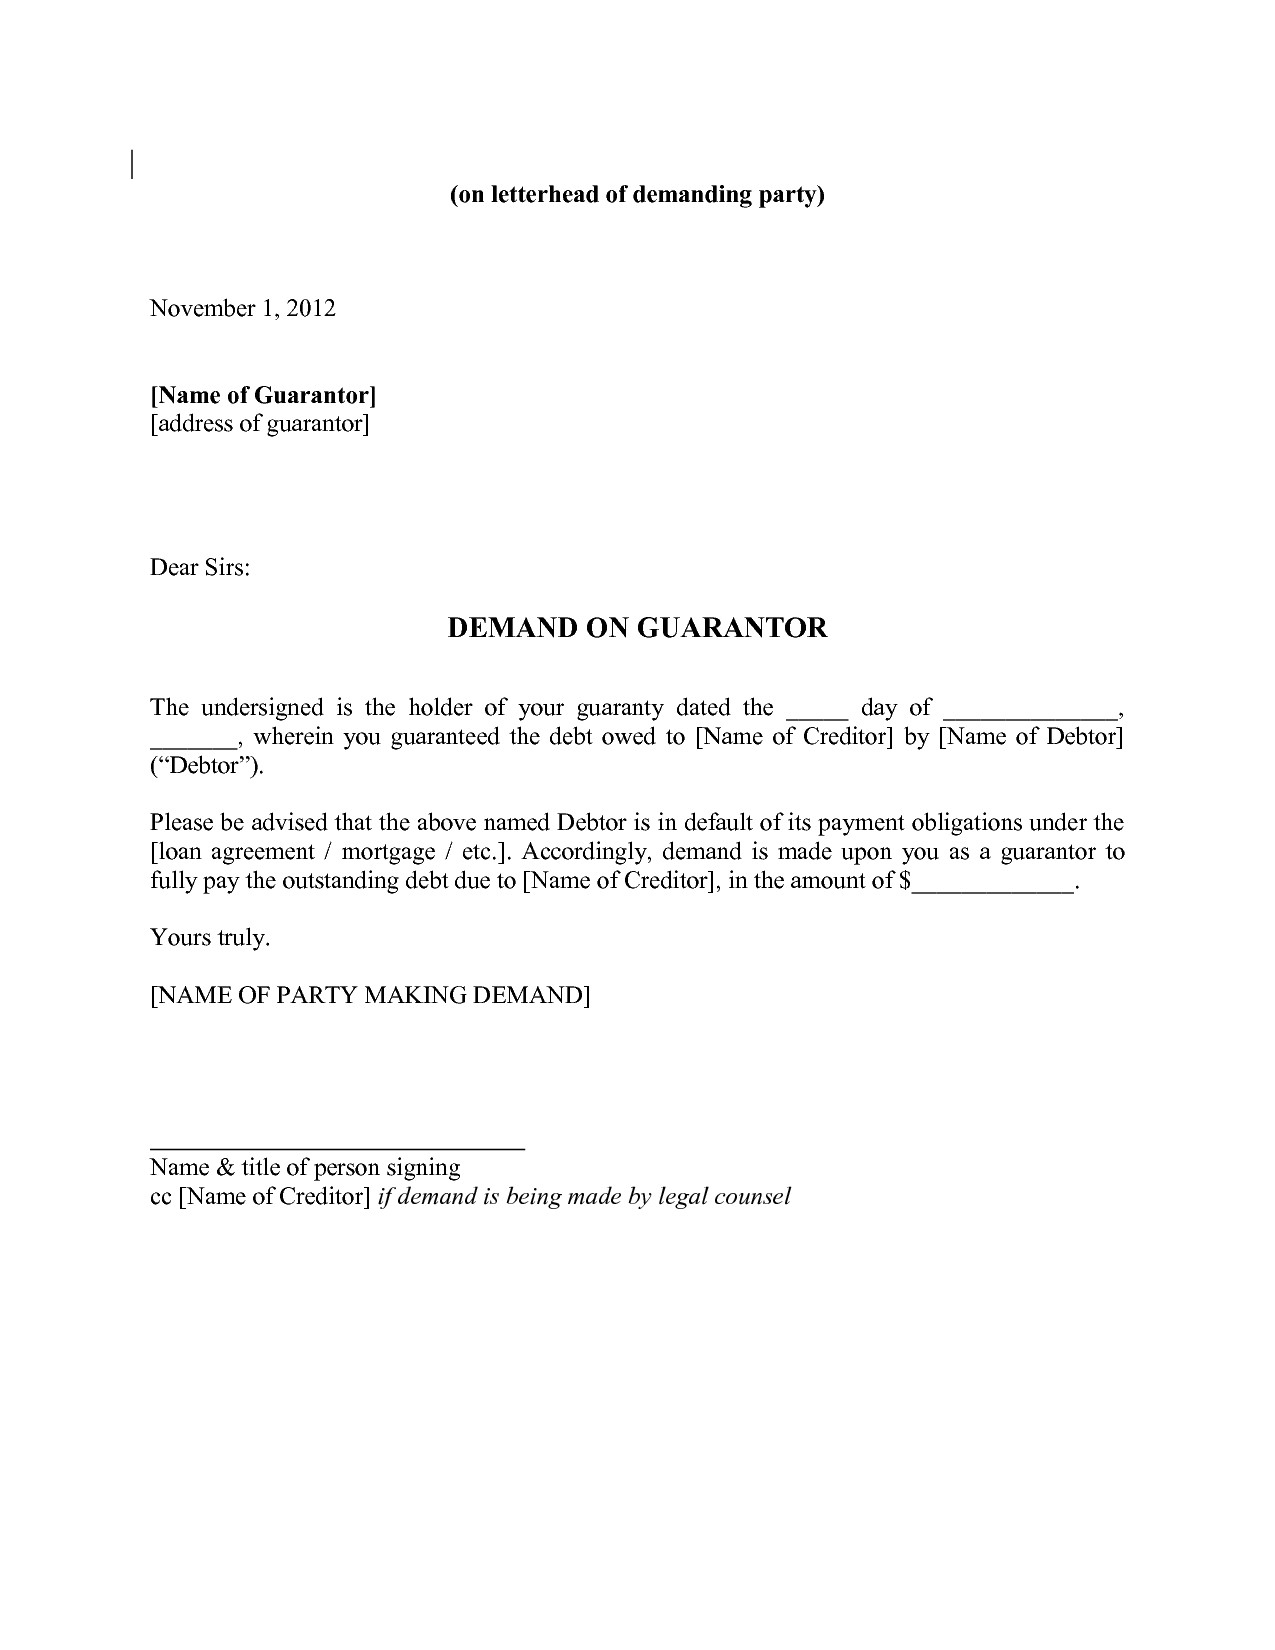 notice of default letter template